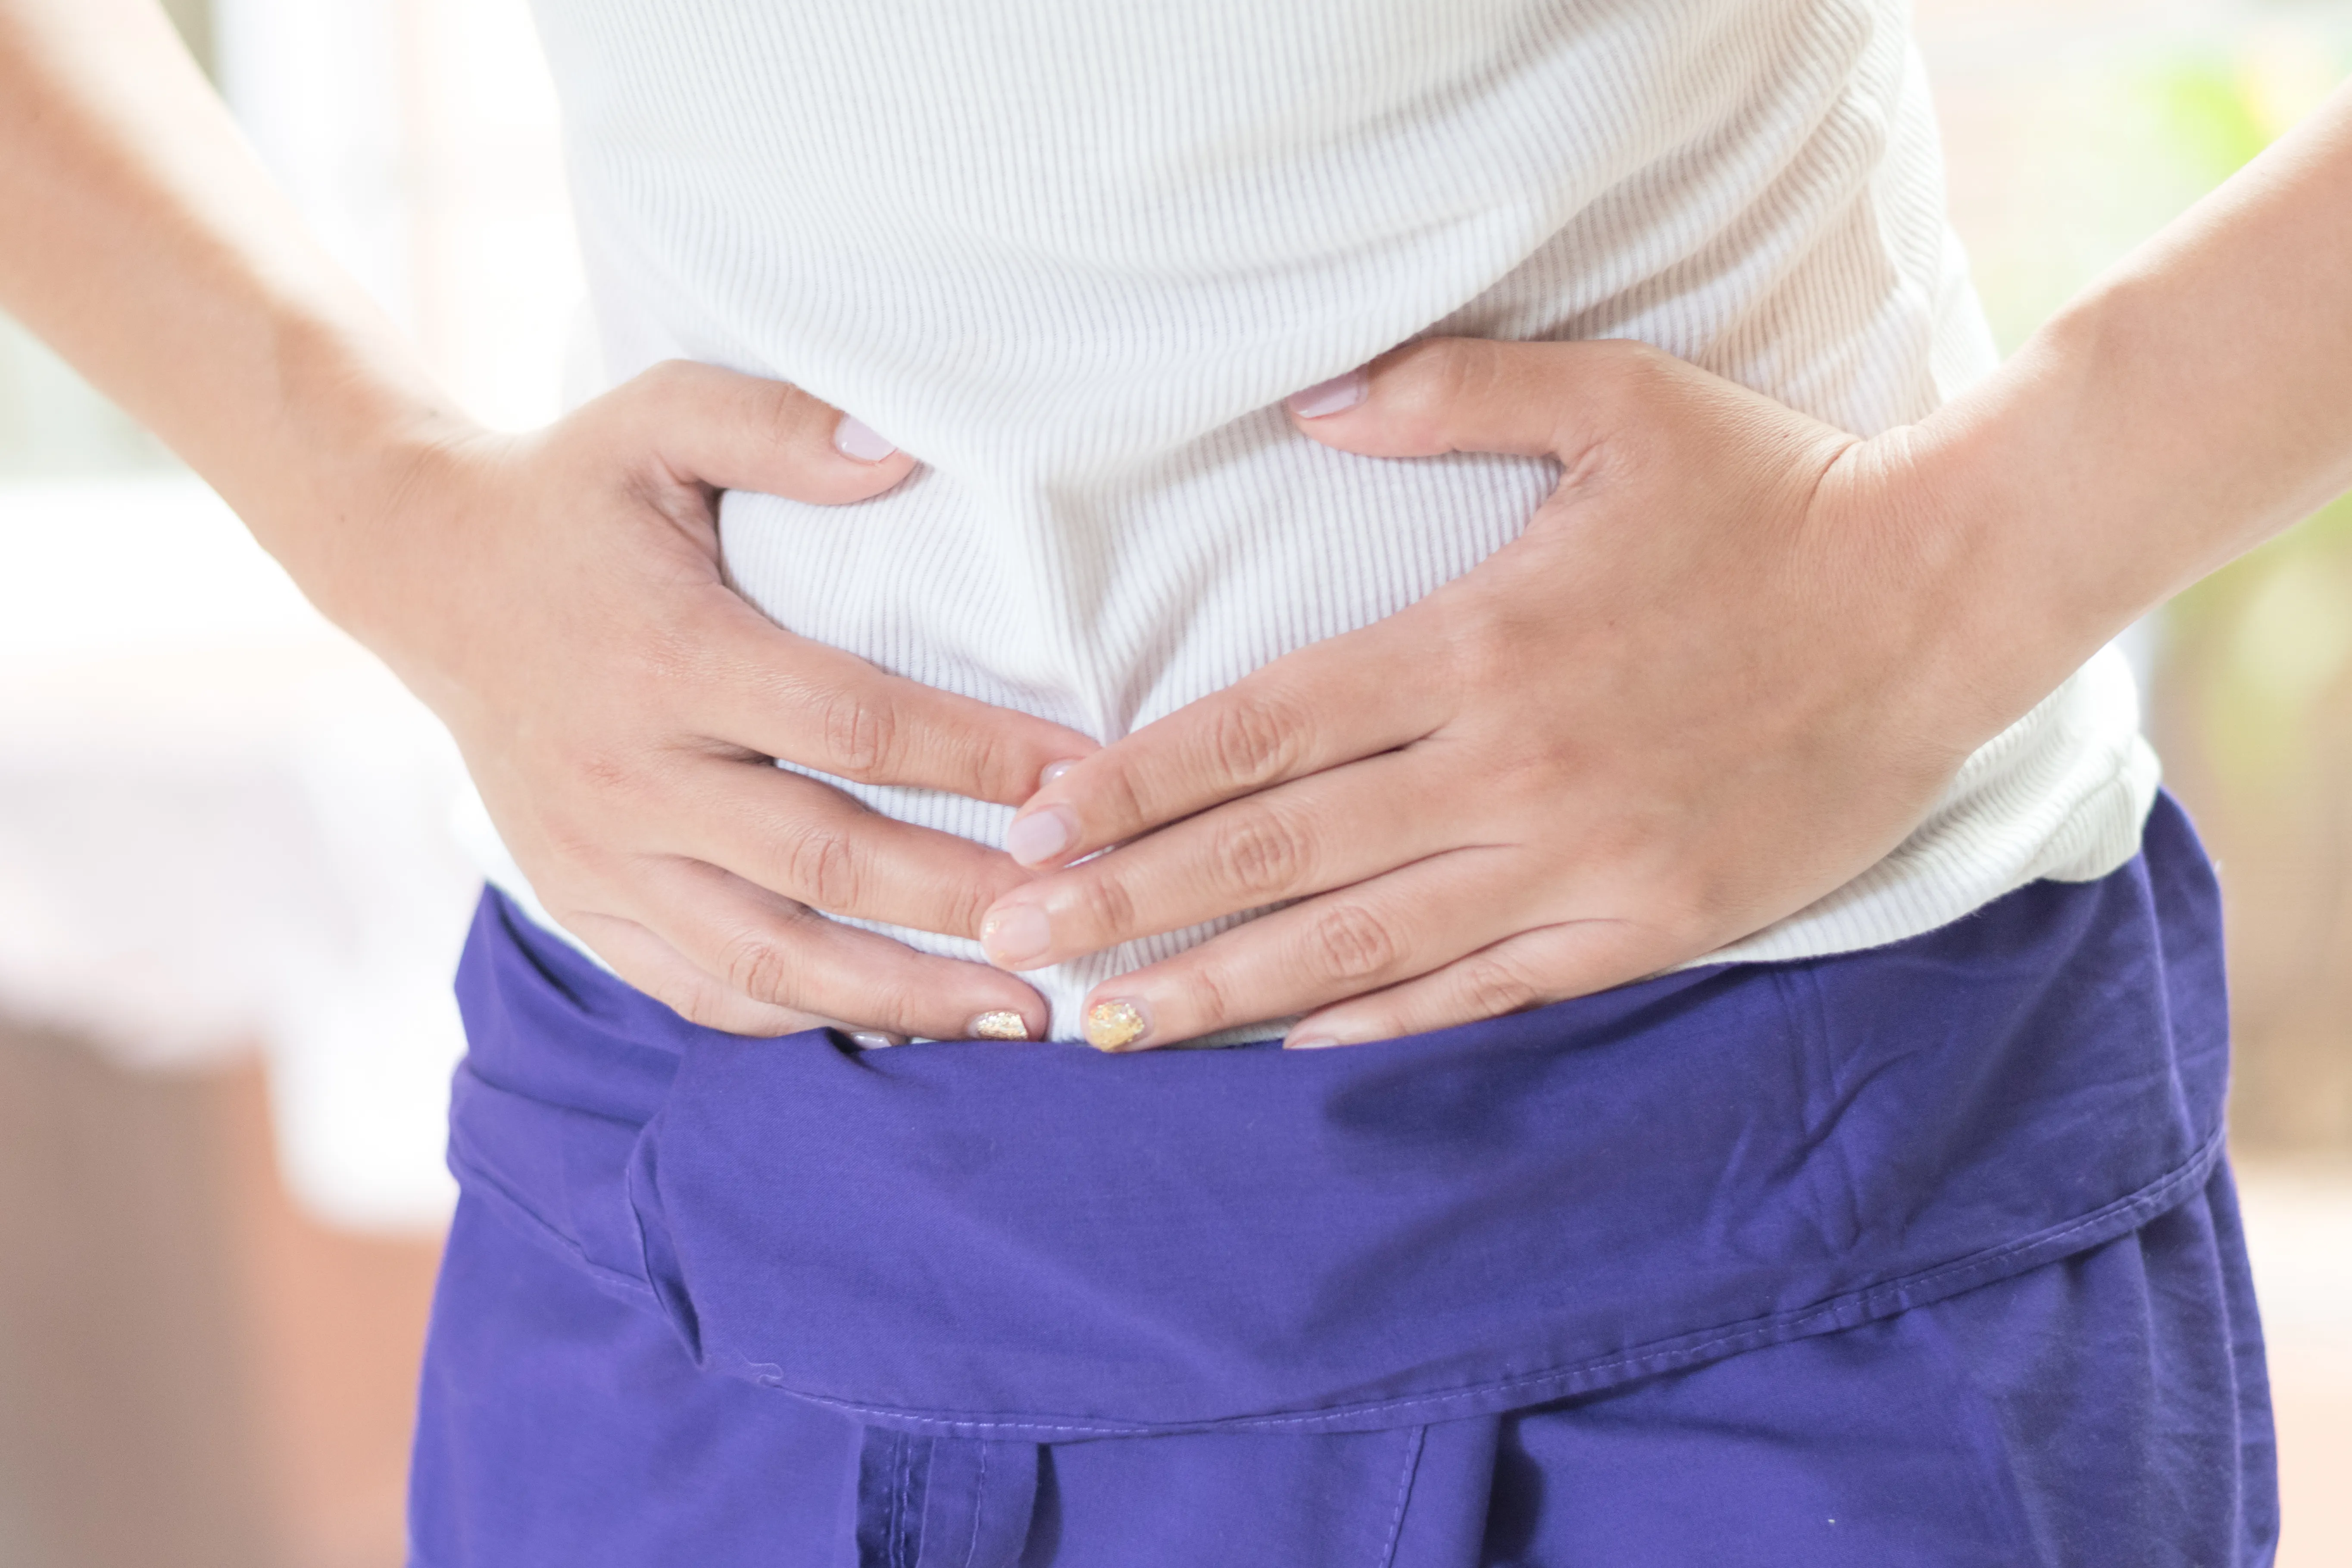 Do You Know the Signs and Symptoms of Crohn’s Disease?